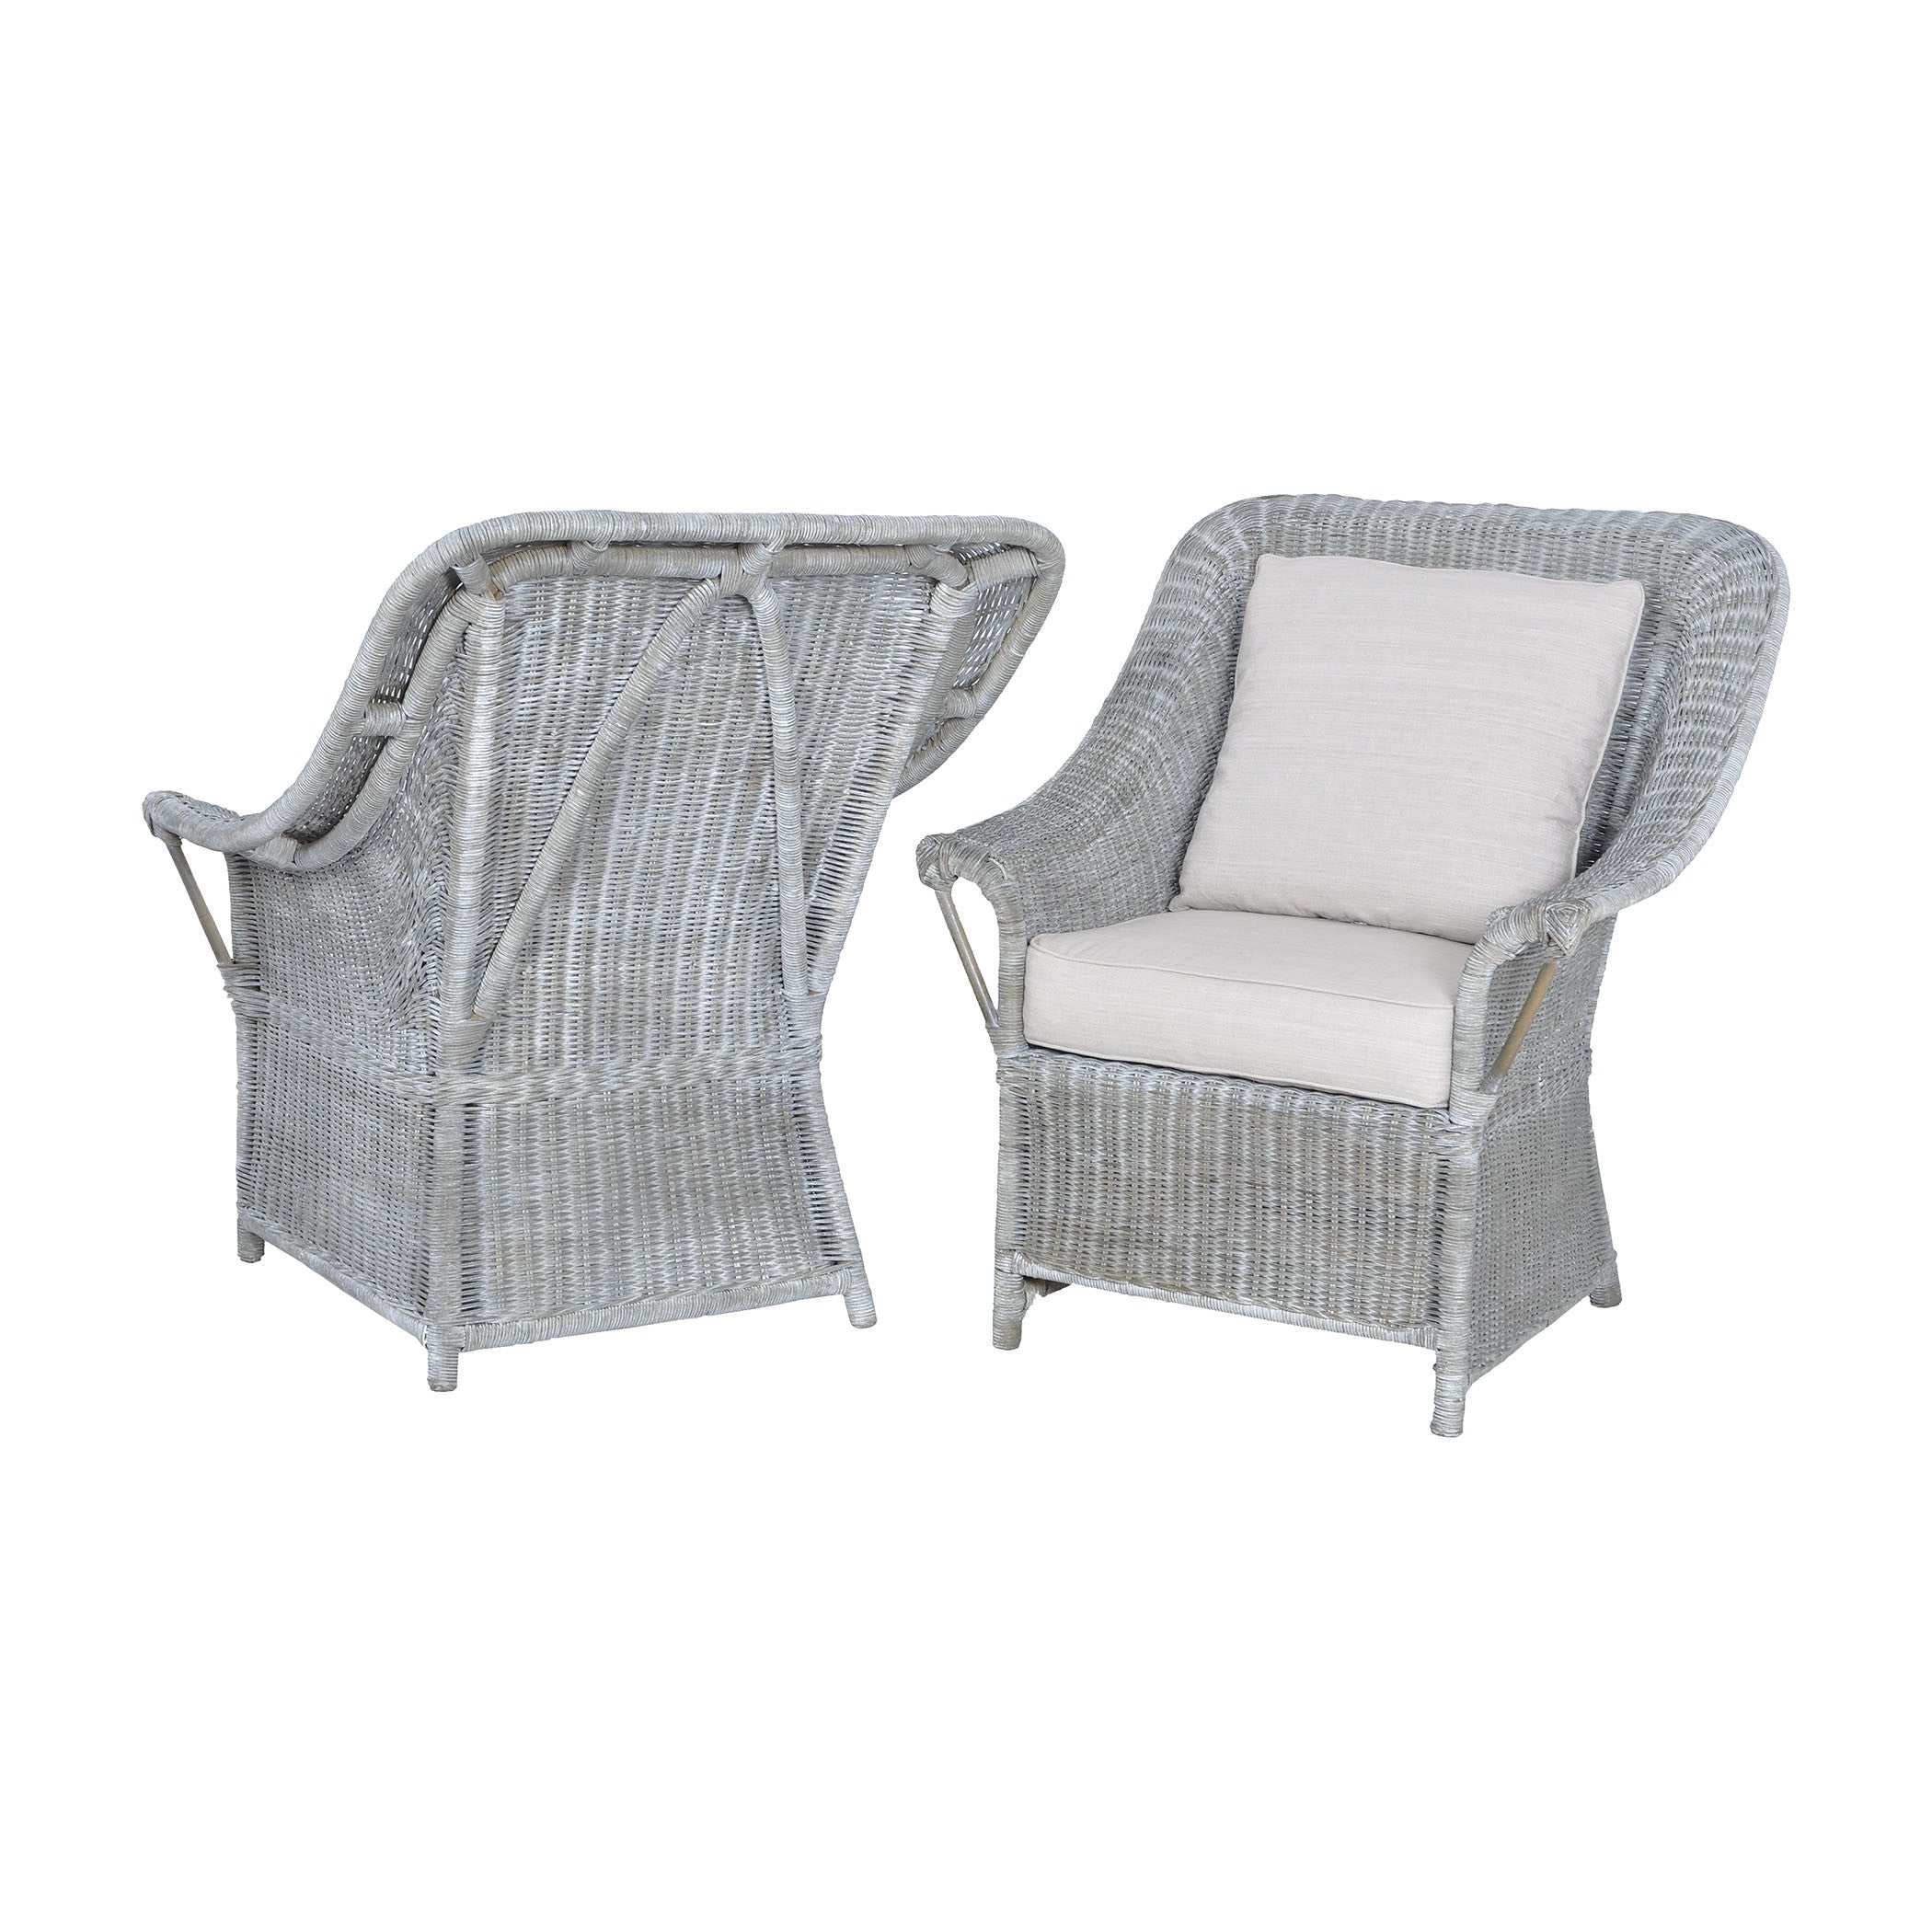 Guildmaster Gui-6515511p Retreat Collection Waterfront Grey Stain,white Wash Finish Chair